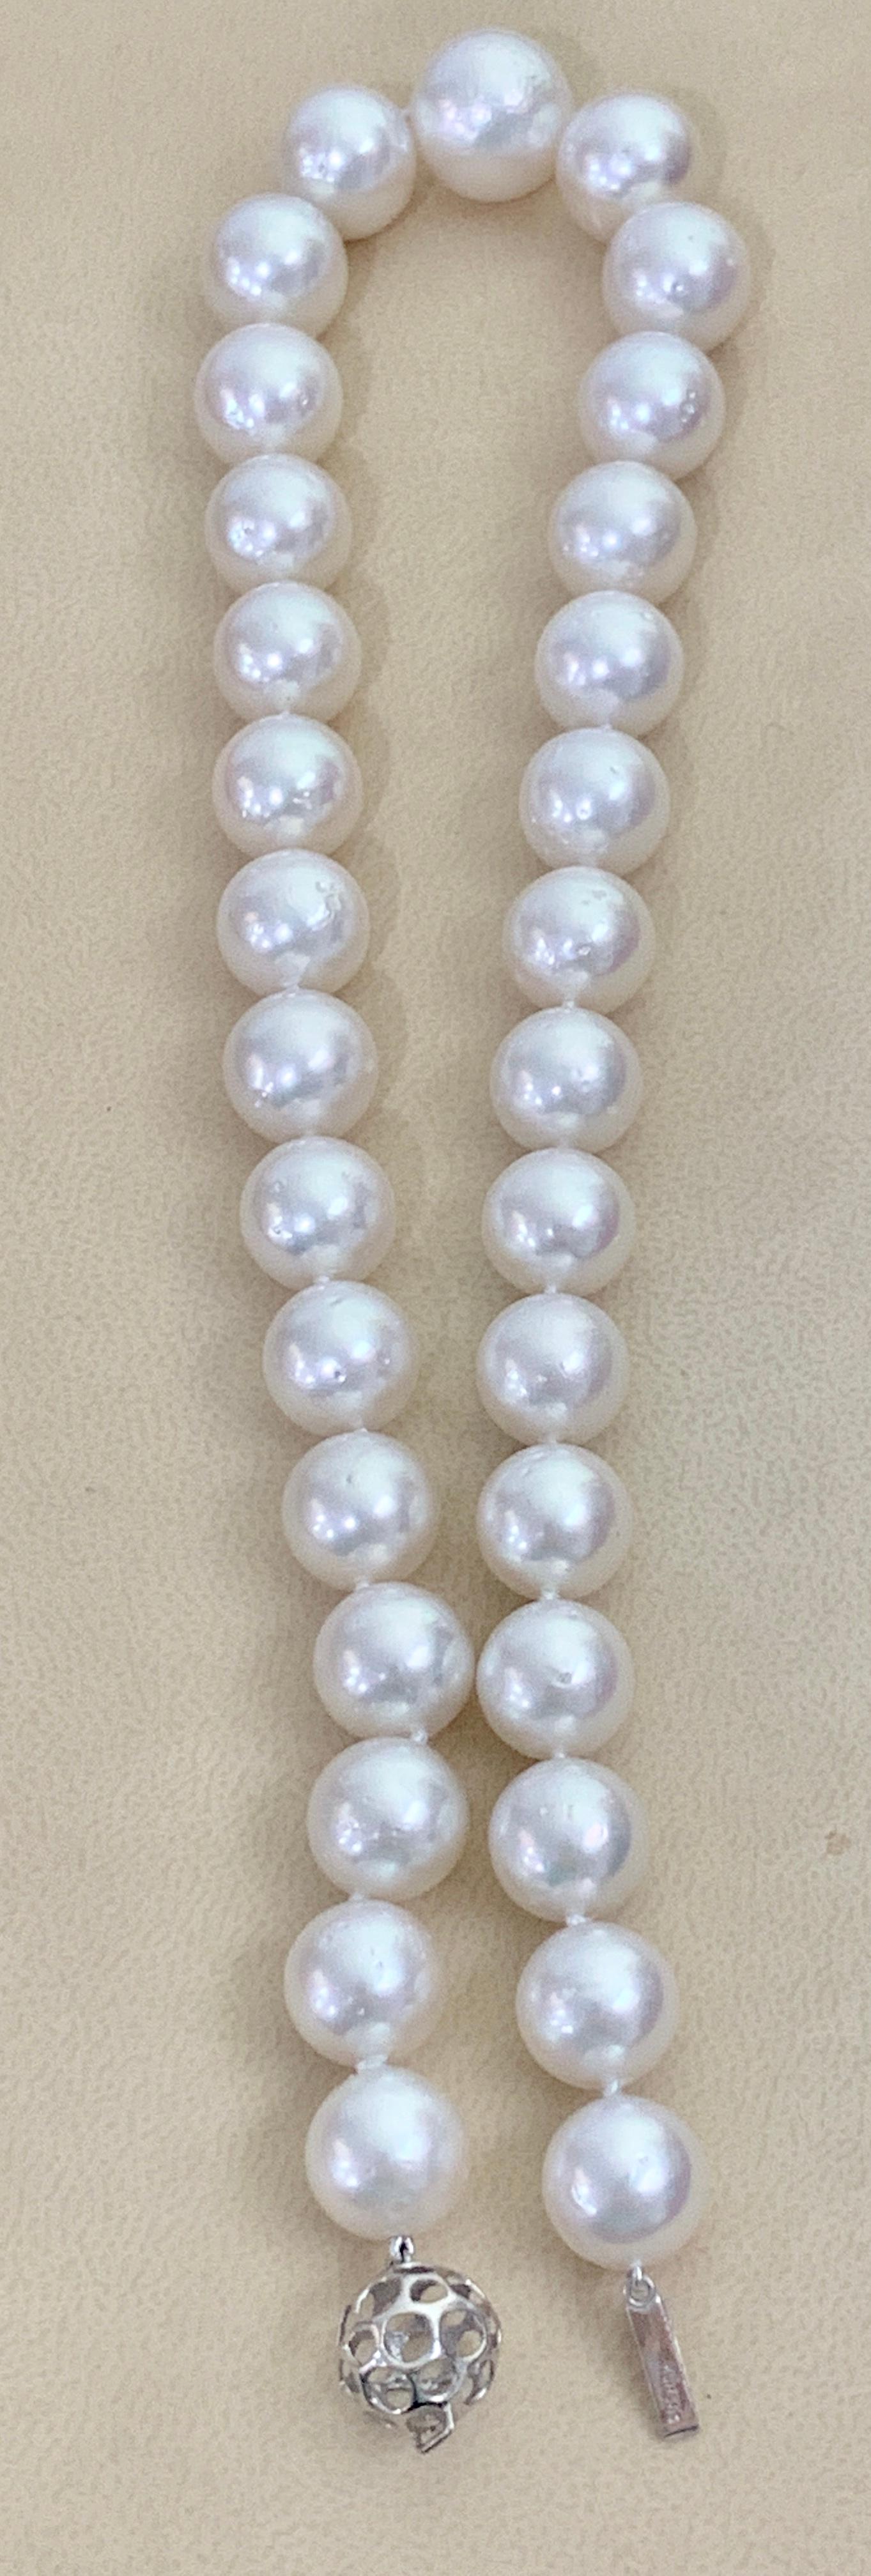 Women's White South Sea Pearls Long Strand Necklace 14 Karat Gold Clasp For Sale